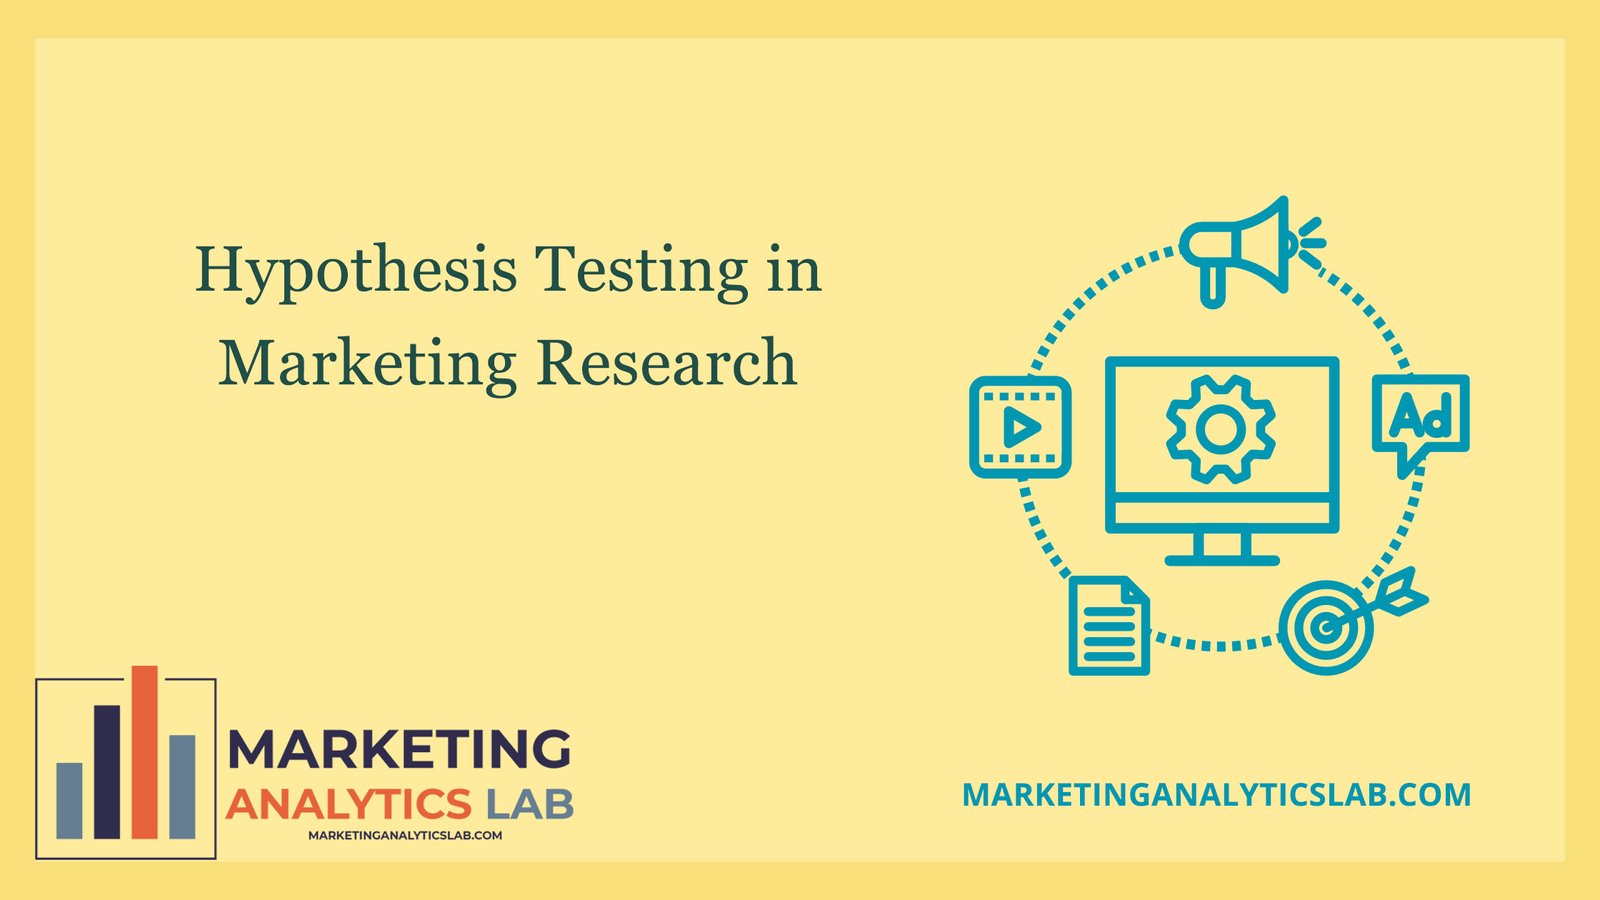 Hypothesis Testing in Marketing Research